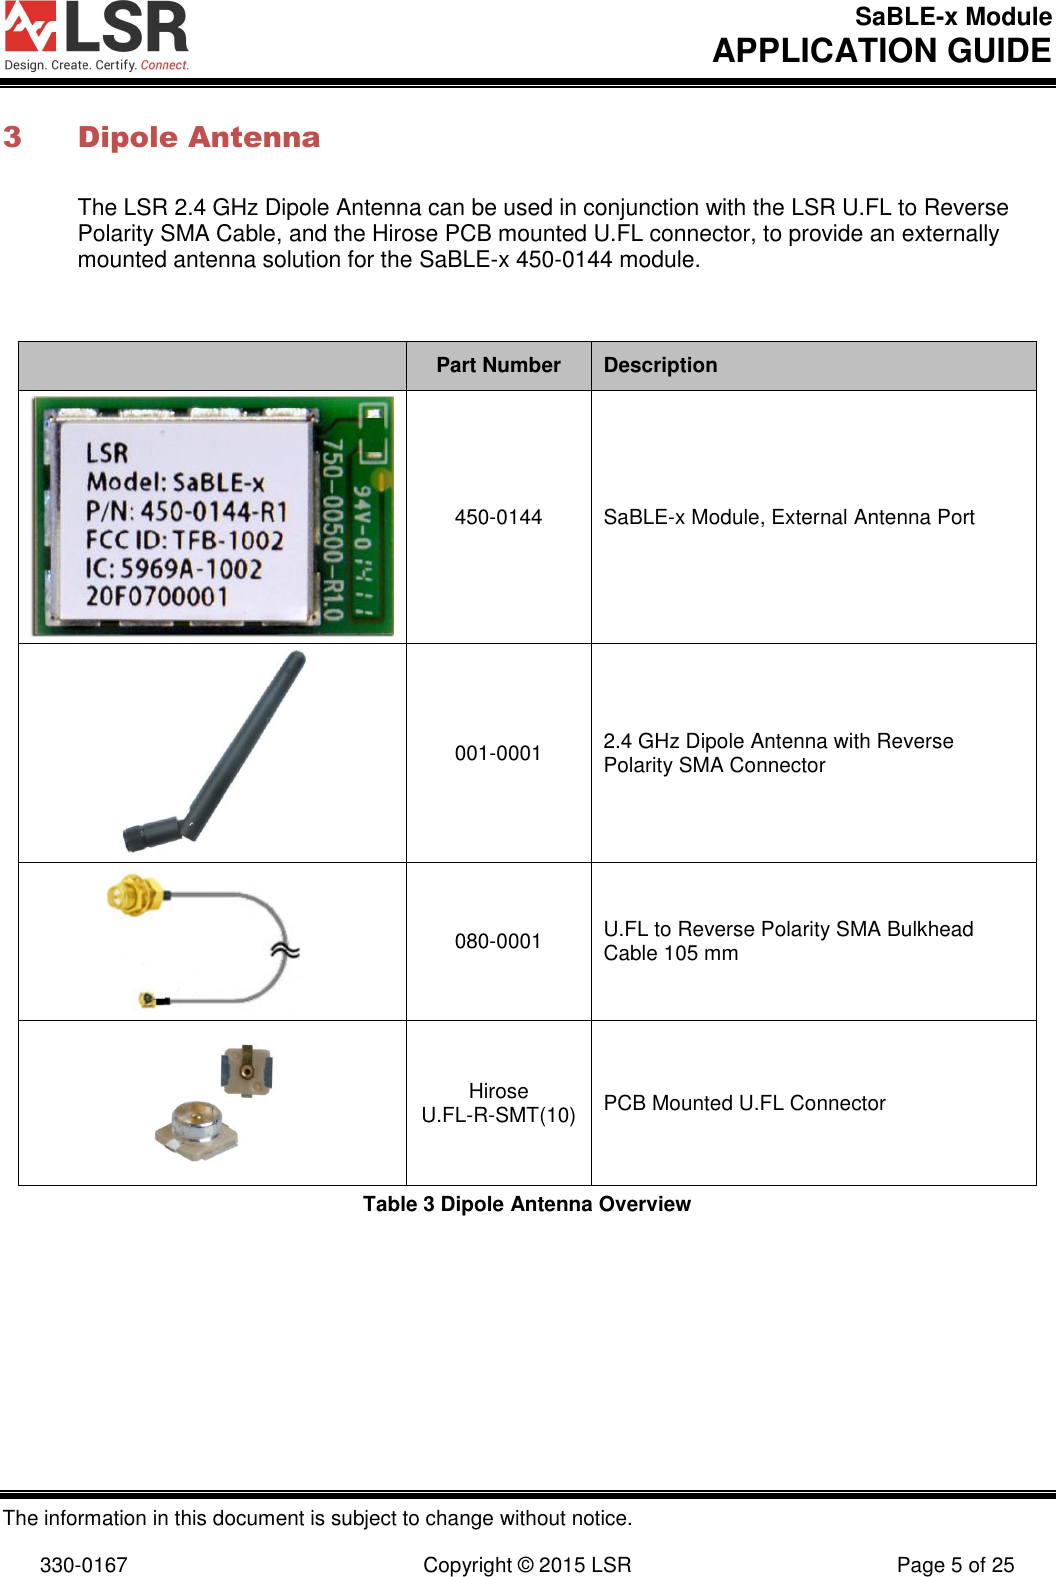 SaBLE-x Module       APPLICATION GUIDE  The information in this document is subject to change without notice.  330-0167  Copyright © 2015 LSR  Page 5 of 25 3 Dipole Antenna The LSR 2.4 GHz Dipole Antenna can be used in conjunction with the LSR U.FL to Reverse Polarity SMA Cable, and the Hirose PCB mounted U.FL connector, to provide an externally mounted antenna solution for the SaBLE-x 450-0144 module.   Part Number Description  450-0144 SaBLE-x Module, External Antenna Port  001-0001 2.4 GHz Dipole Antenna with Reverse Polarity SMA Connector  080-0001 U.FL to Reverse Polarity SMA Bulkhead Cable 105 mm  Hirose  U.FL-R-SMT(10) PCB Mounted U.FL Connector Table 3 Dipole Antenna Overview       